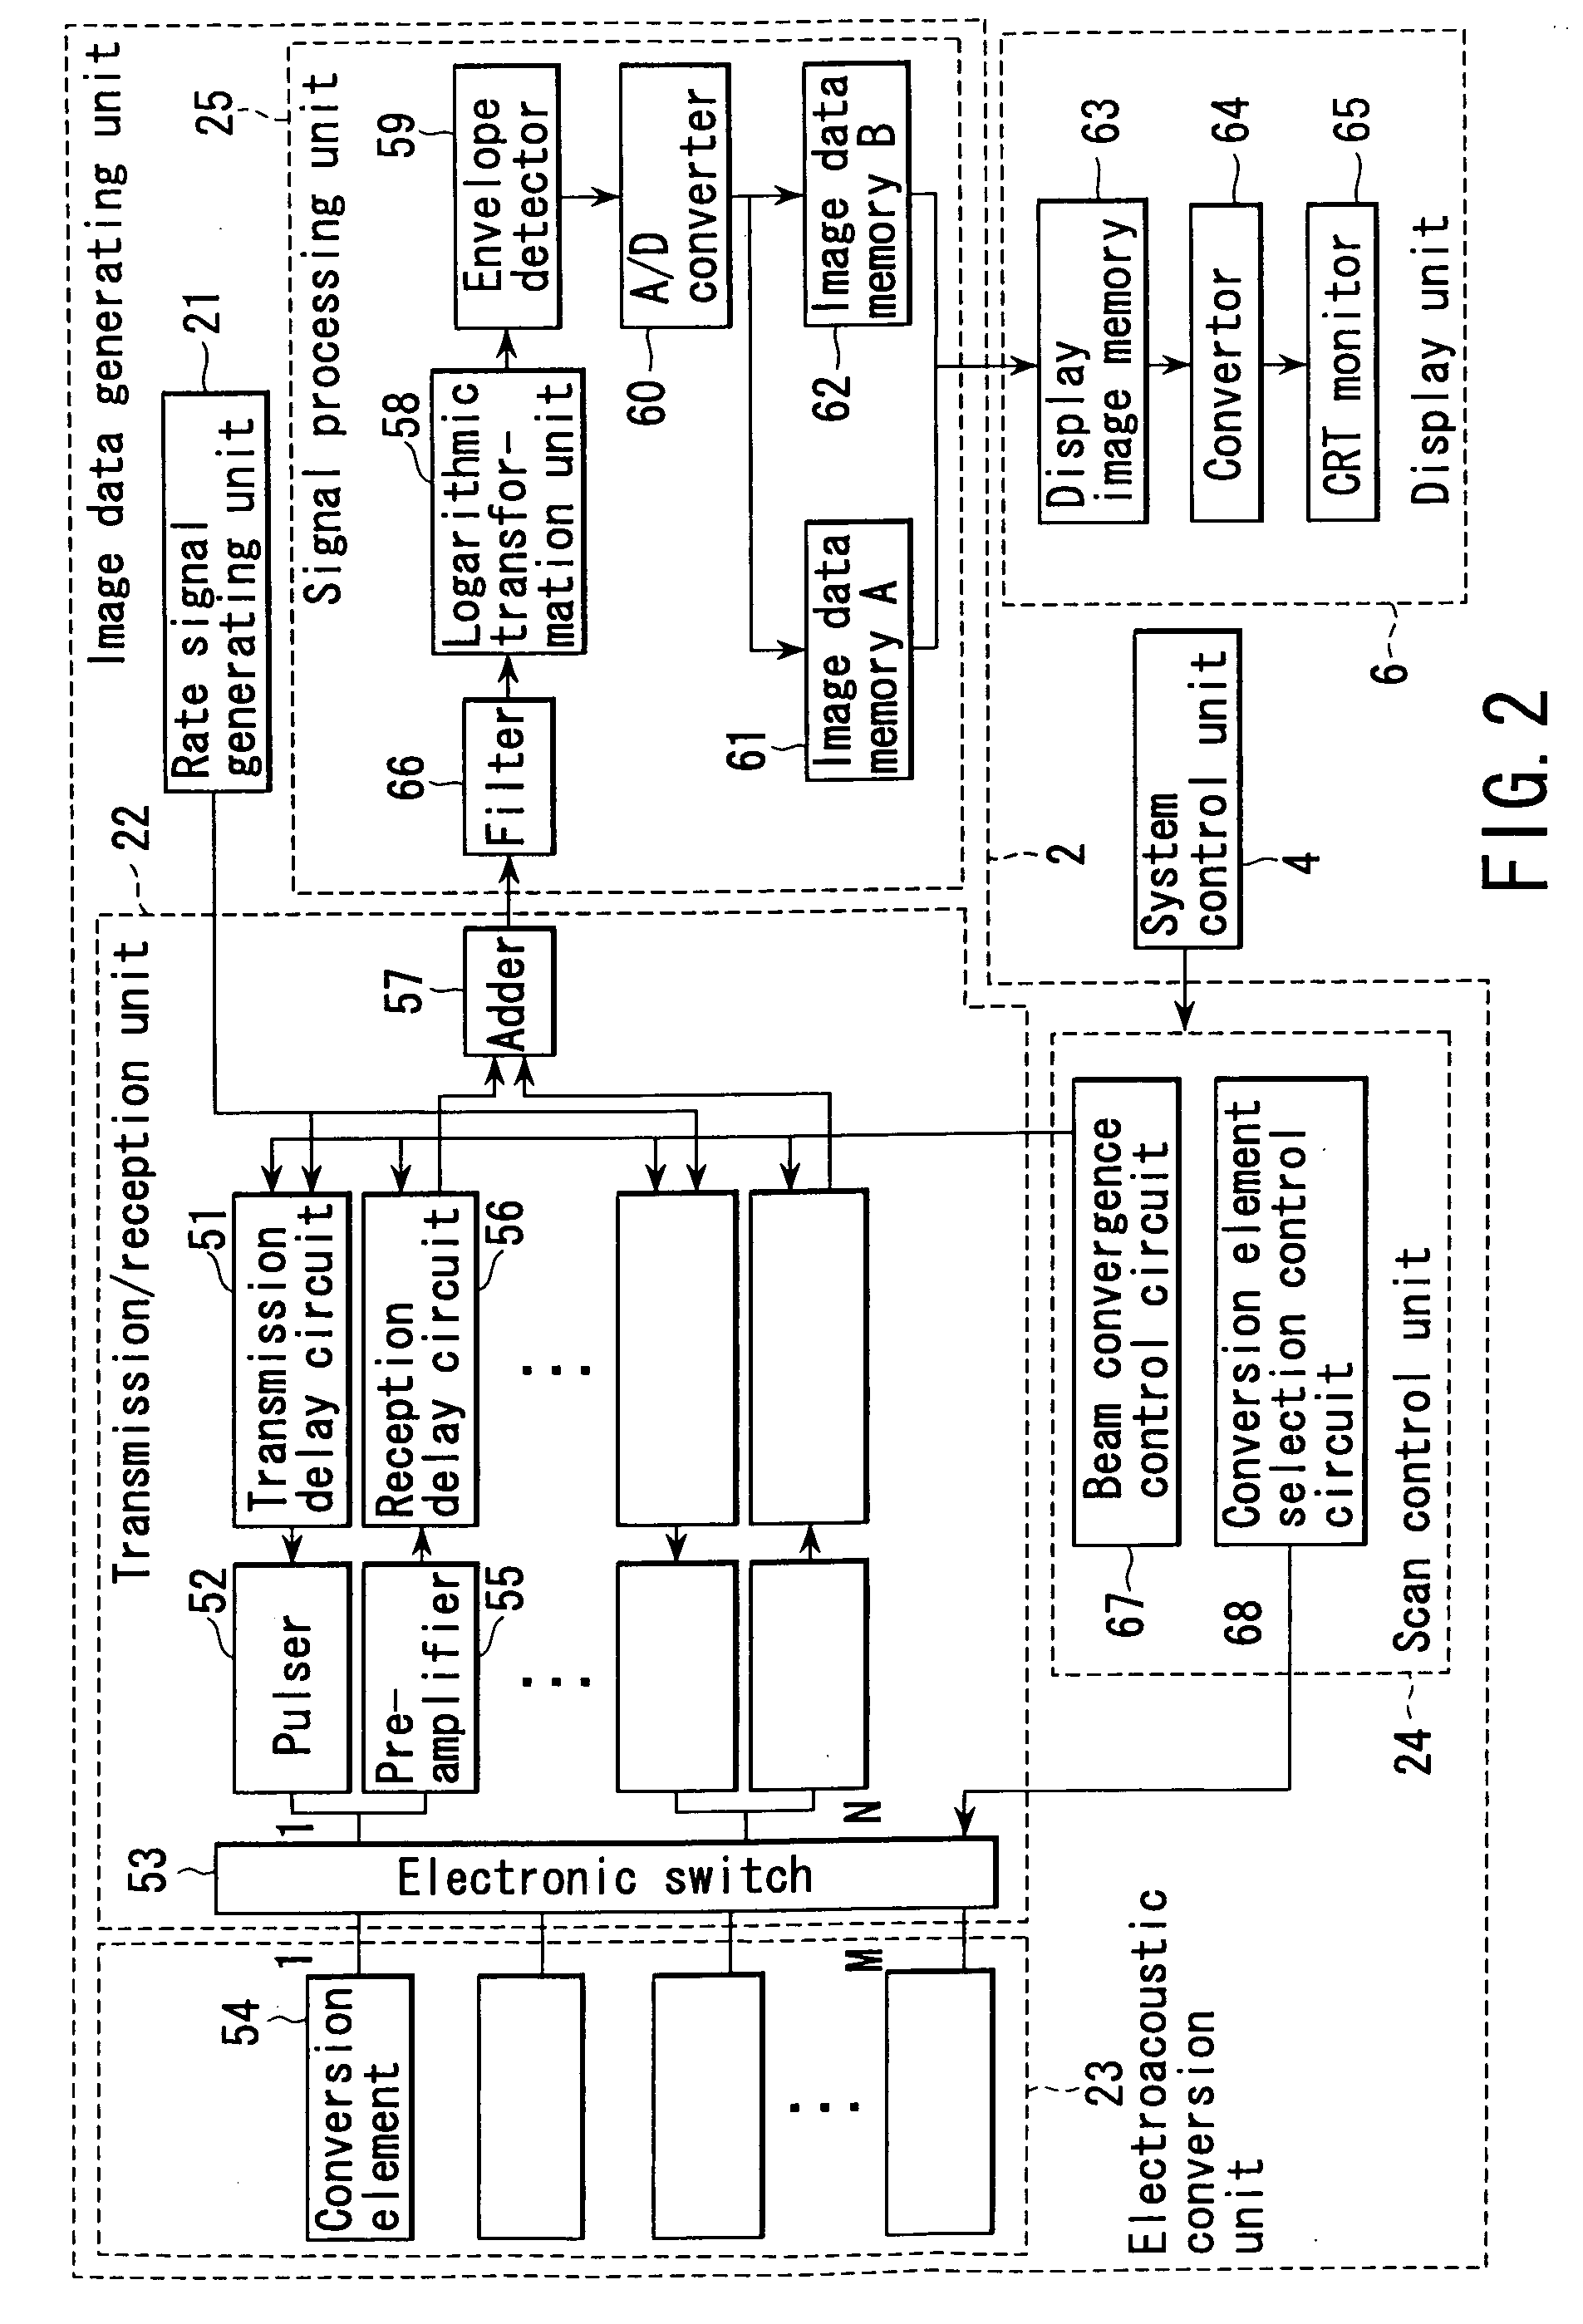 Method and apparatus for forming an image that shows information about a subject